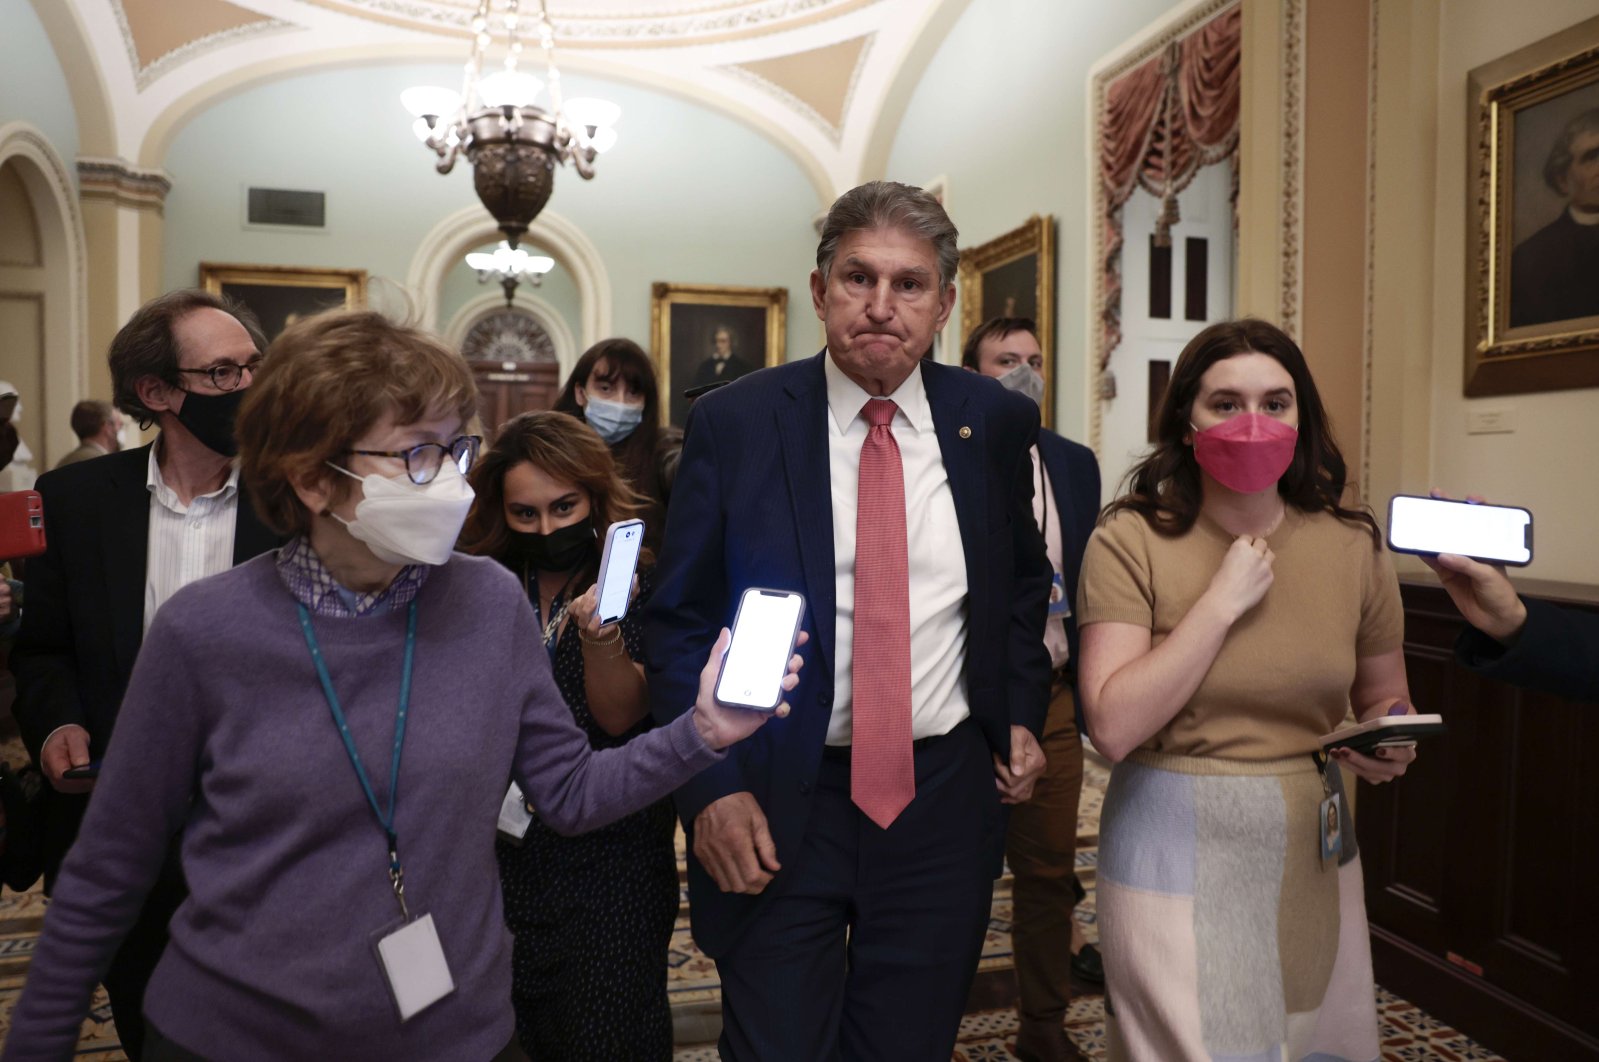 Sen. Joe Manchin (D-WV) is followed by reporters as he leaves a caucus meeting with Senate Democrats at the U.S. Capitol Building in Washington, DC, U.S., on Dec. 17, 2021. (Getty Images / AFP)